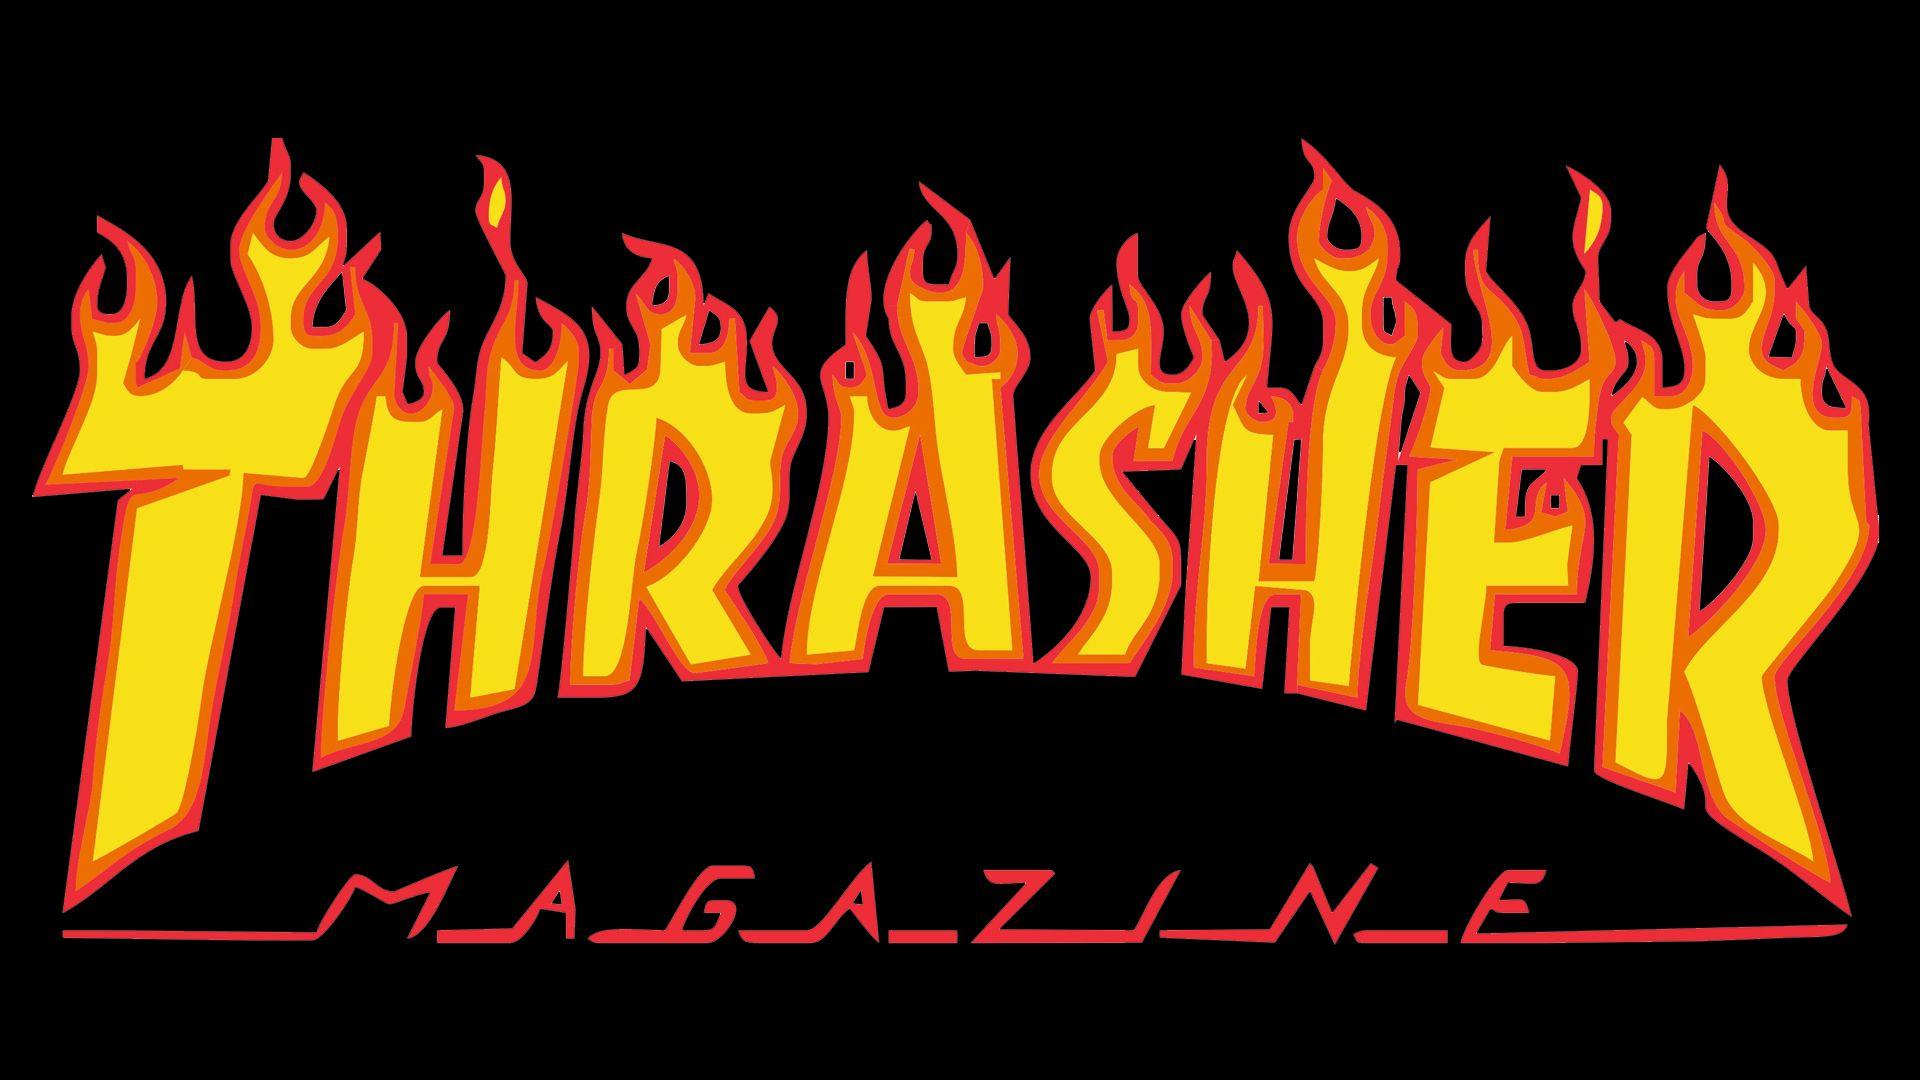 Cool Neon Thrasher Logo - Thrasher Logo, Thrasher Symbol, Meaning, History and Evolution